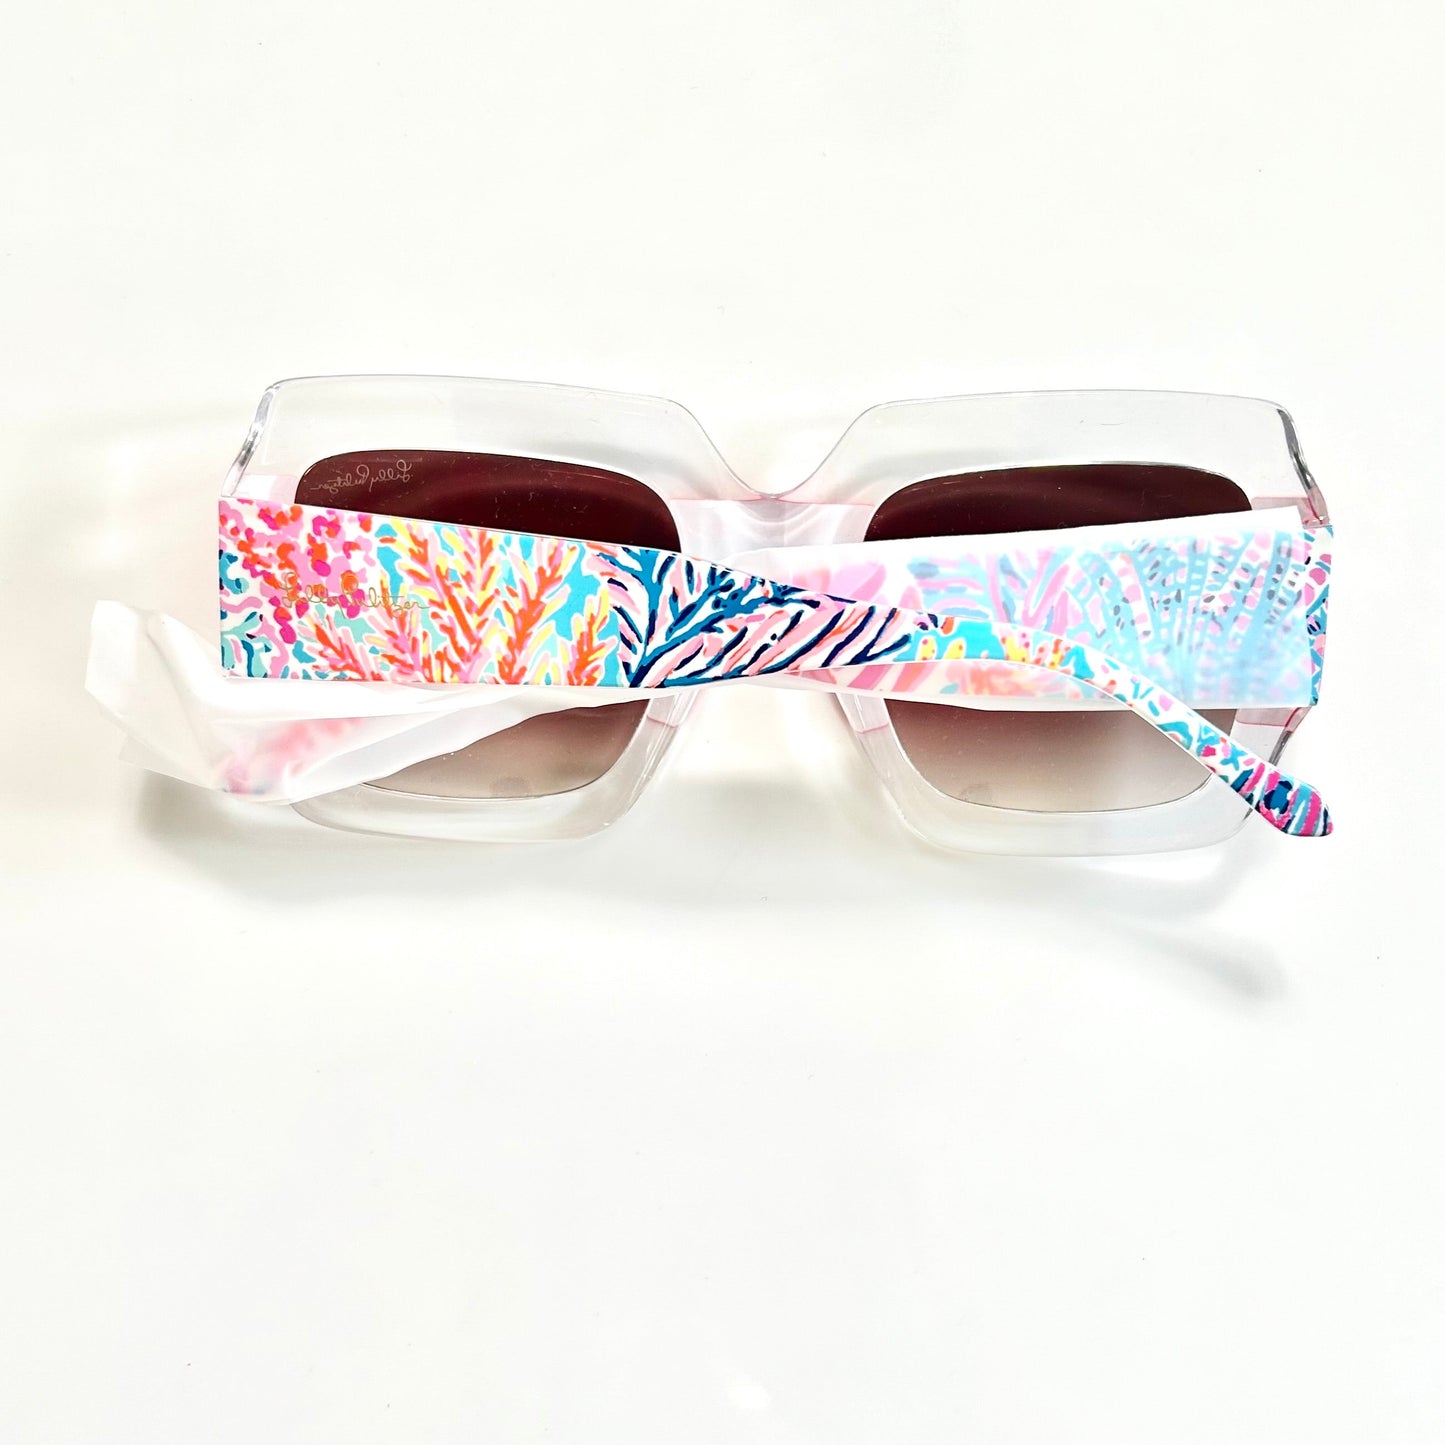 Sunglasses Designer By Lilly Pulitzer